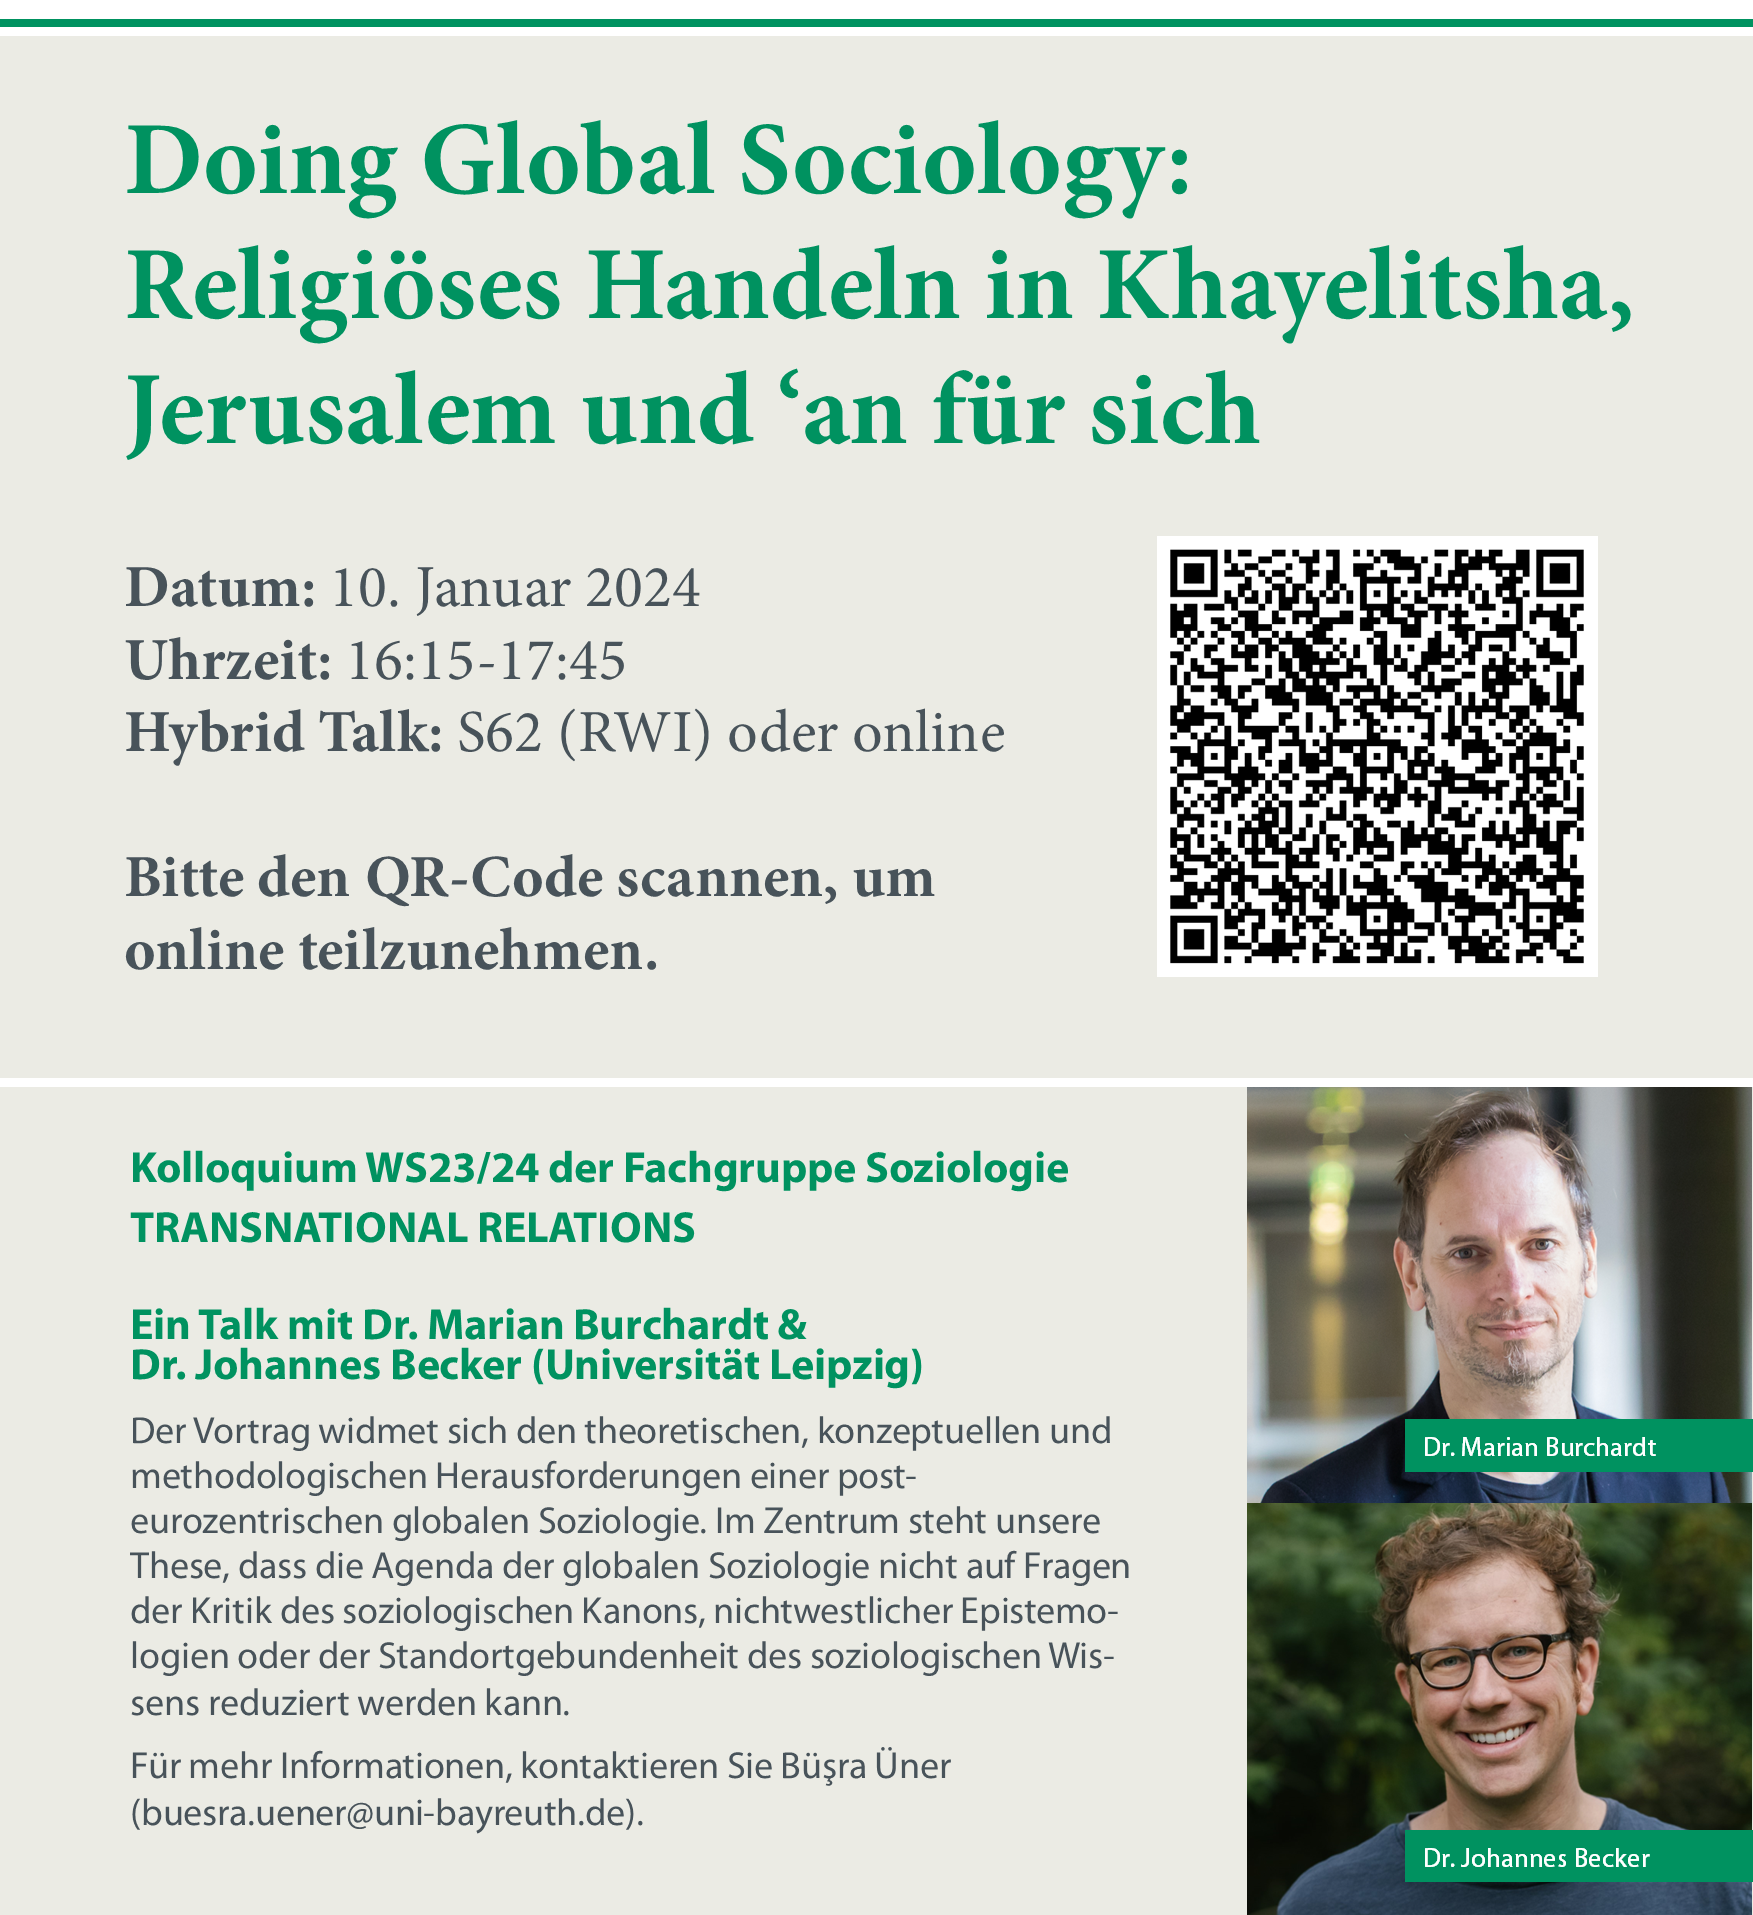 Poster of Talk with Dr. Marian Burchardt and Dr. Johannes Becker